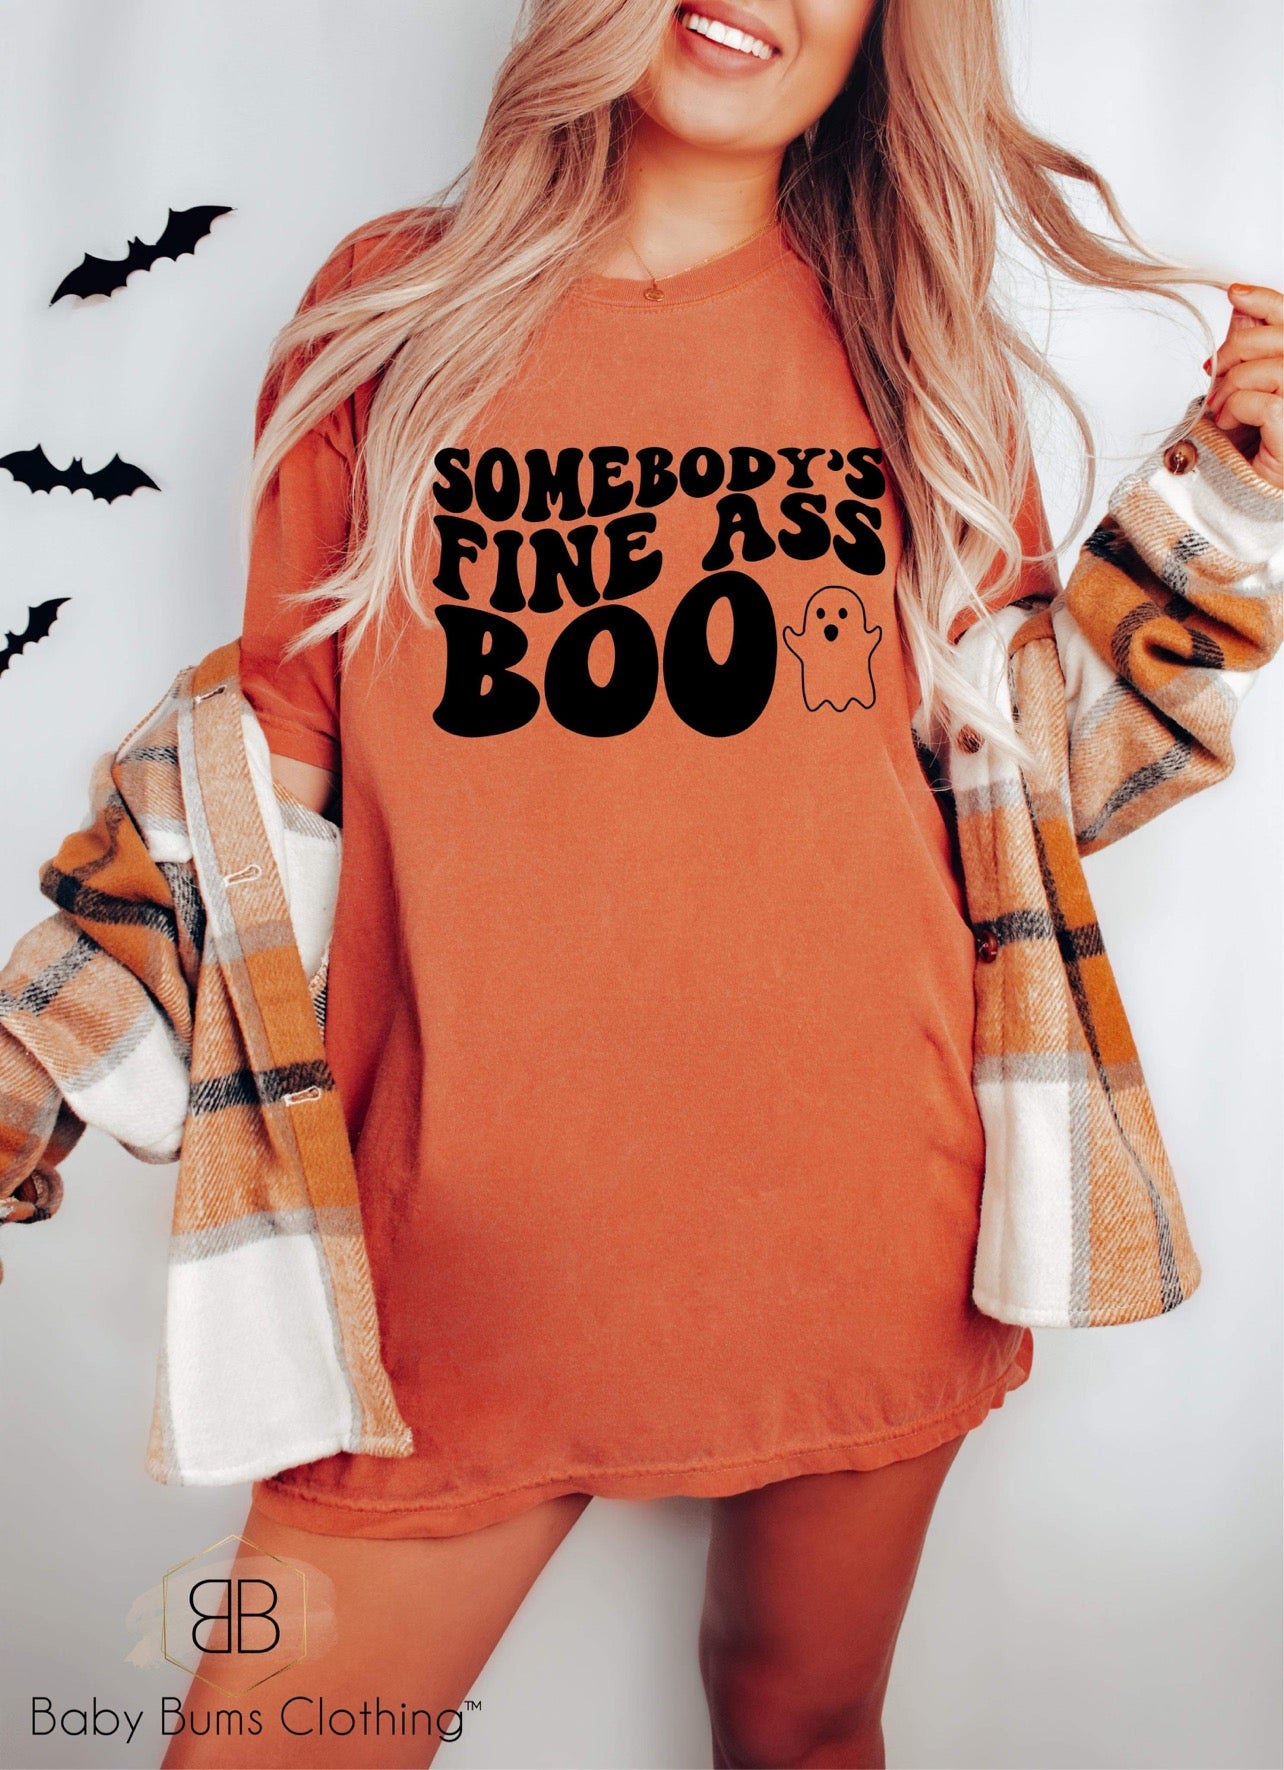 FINE ASS BOO BLACK ADULT UNISEX T-SHIRT - Baby Bums Clothing 